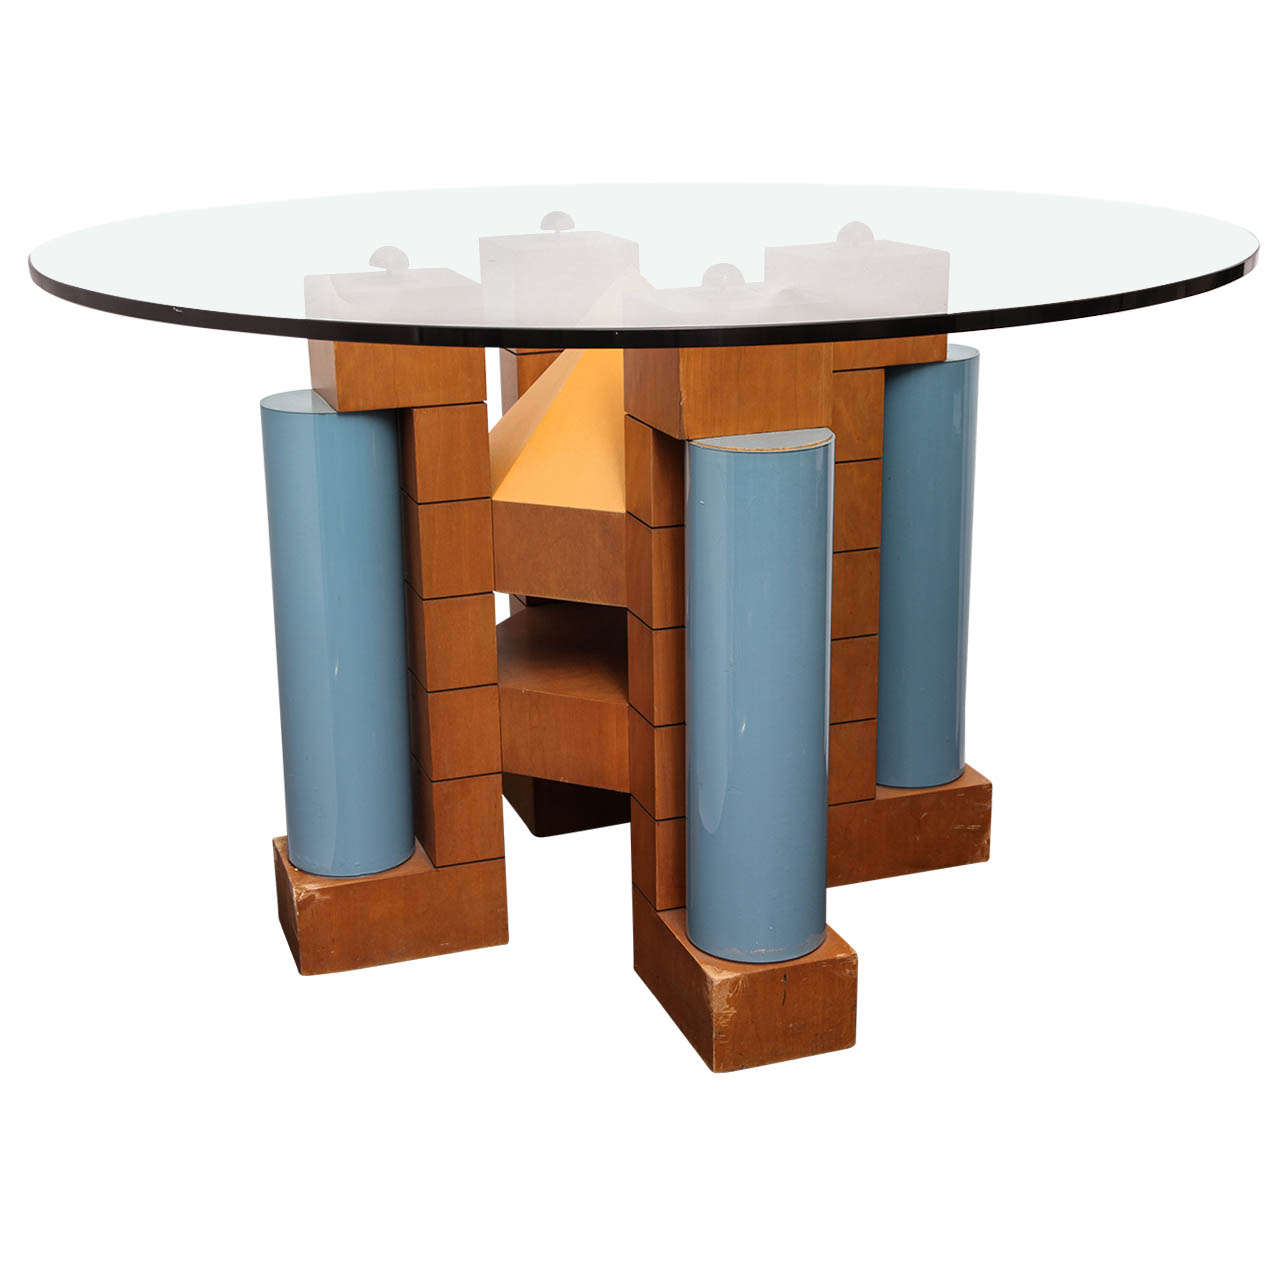 A 1980's Post Modern Dining Table by Michael Graves